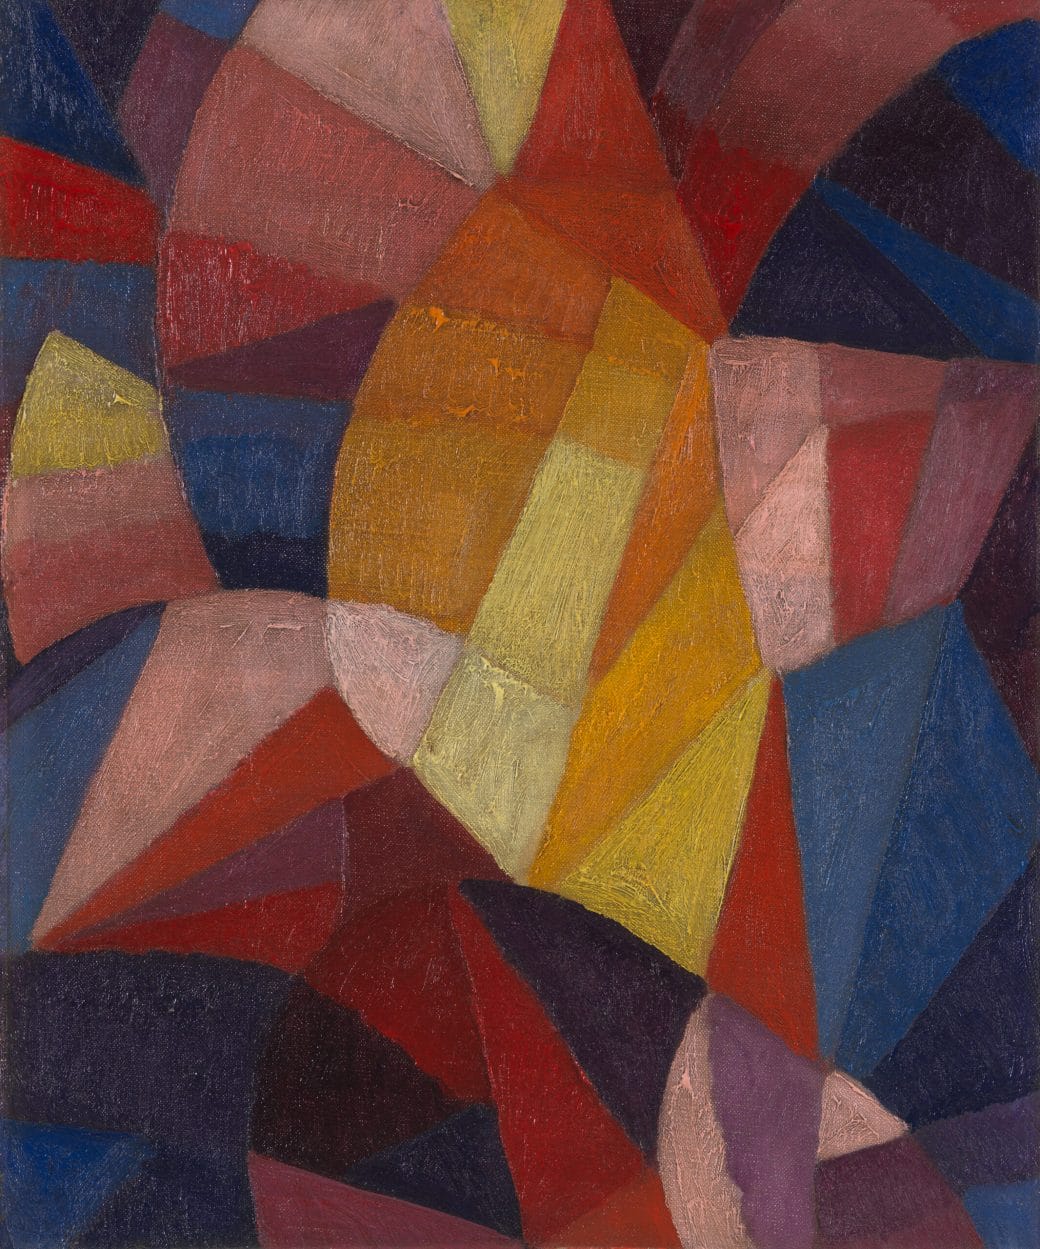 Geometric shapes of purple, pink, red, yellow, and blue with visible brushstrokes fill the canvas.